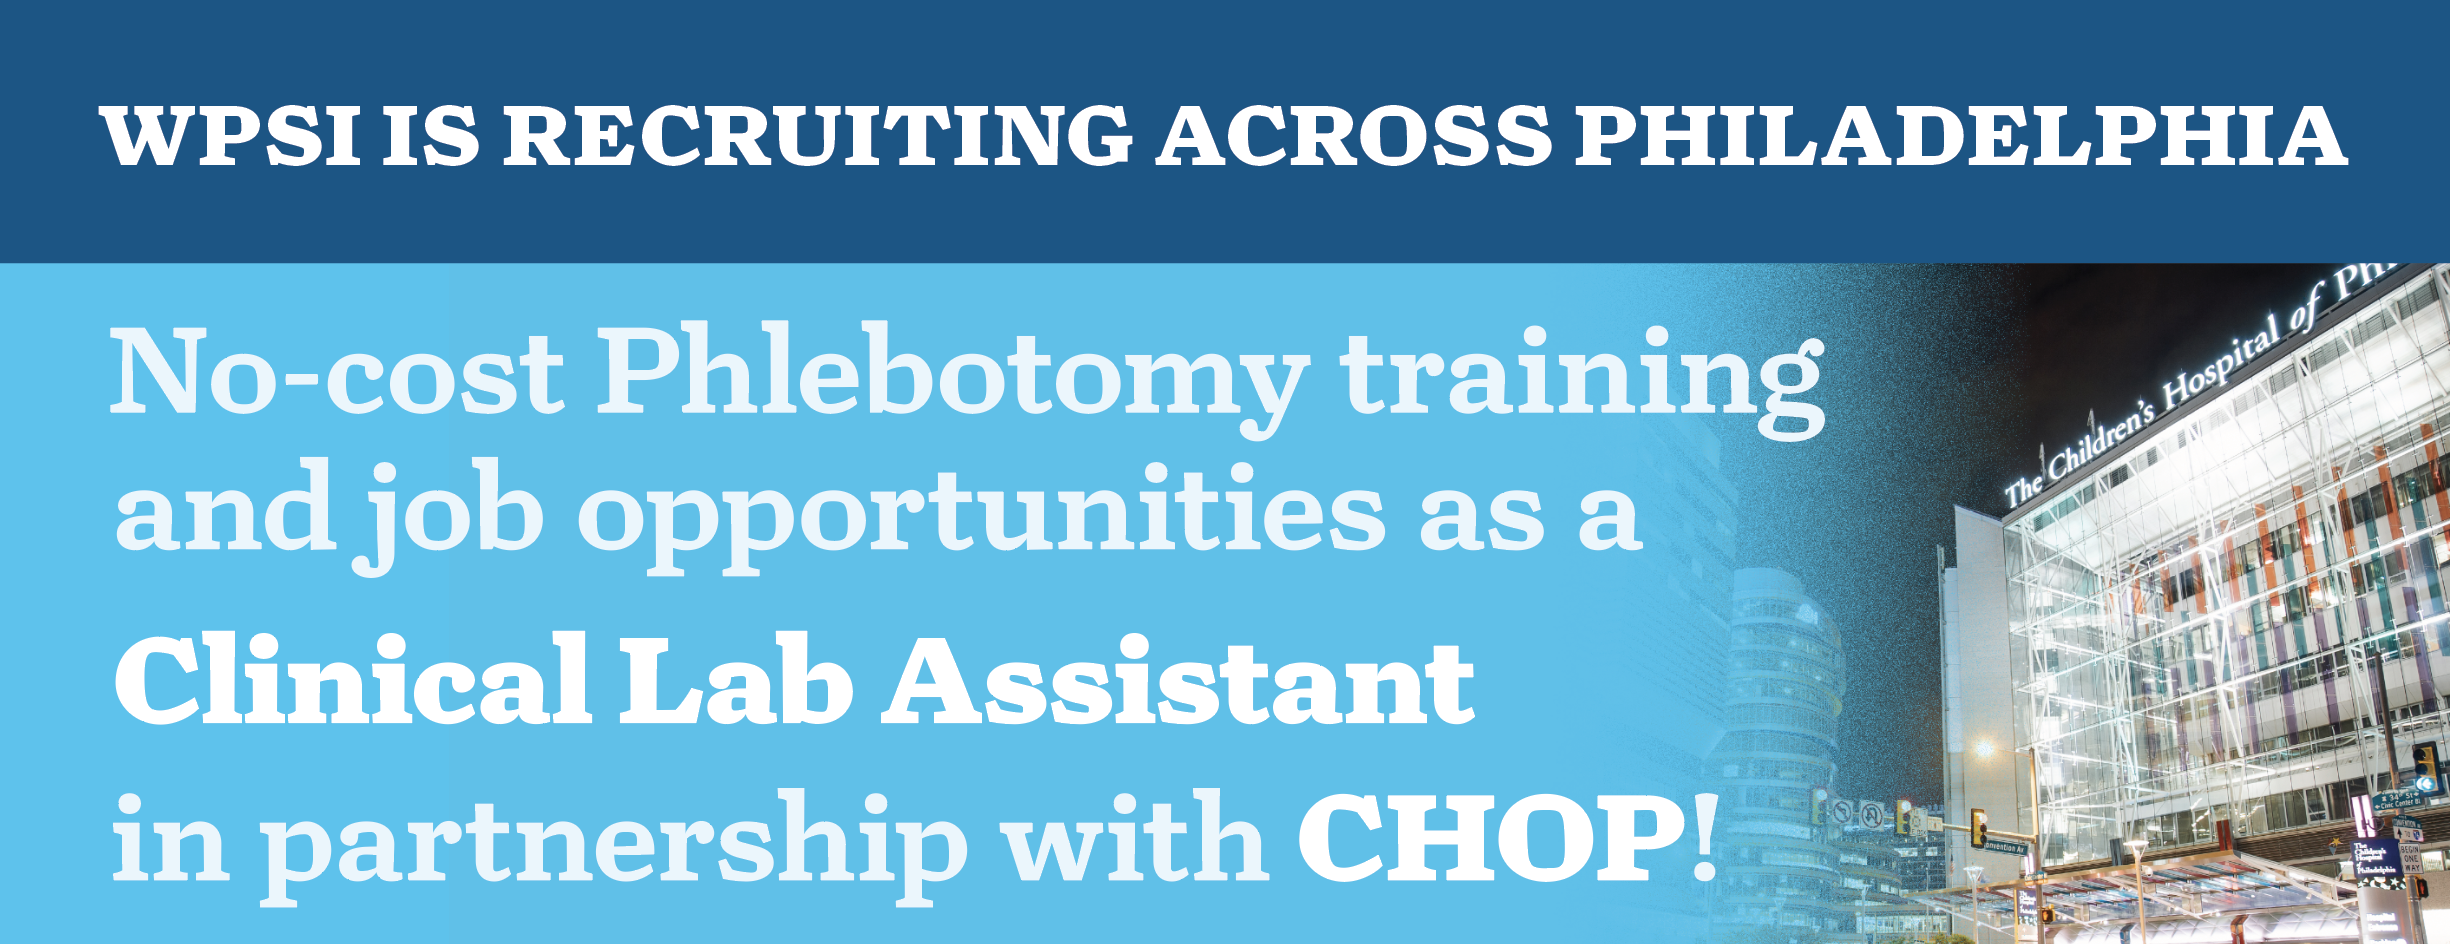 WPSI is recruiting across Philadelphia for No-cost Phlebotomy training and job opportunities as a Clinical Lab Assistant in partnership with CHOP!